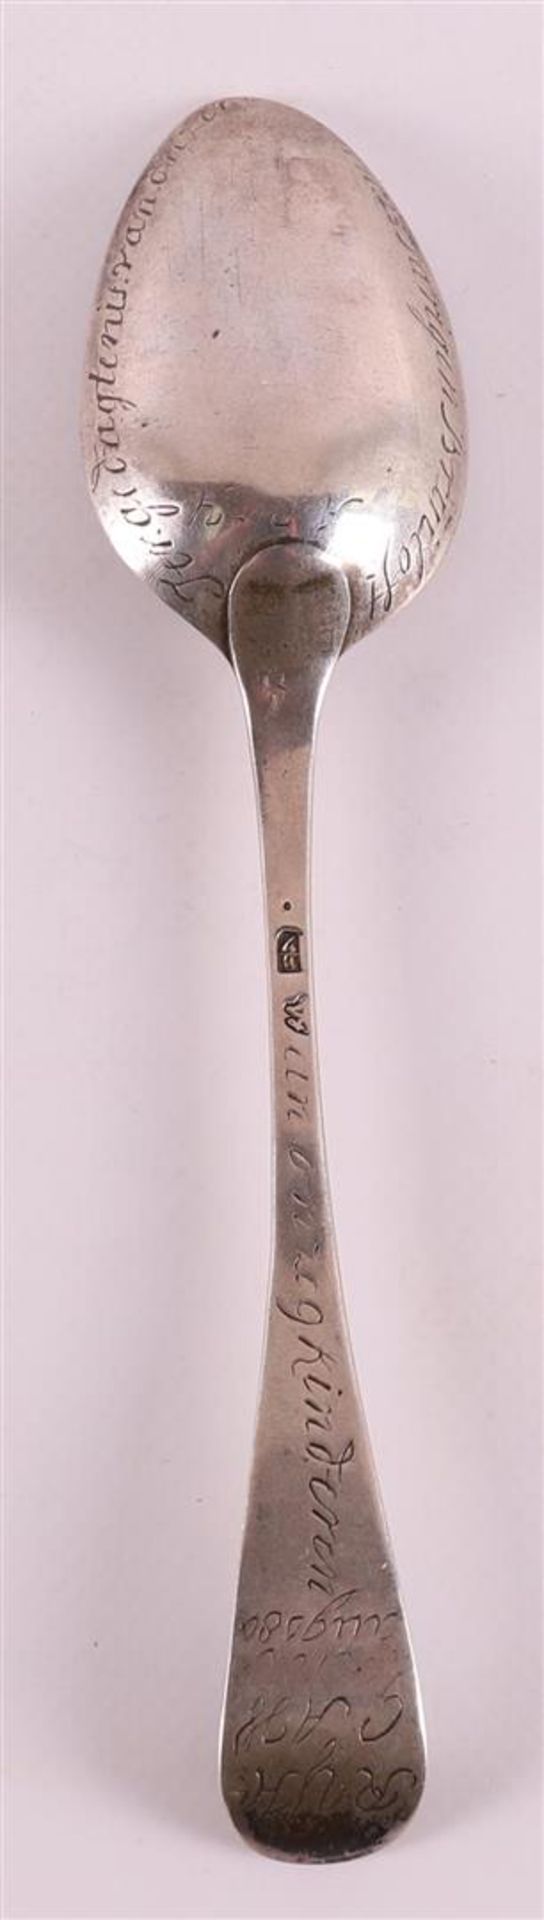 A silver memorial spoon with text, Groningen, year letter 1797/98. - Image 4 of 4